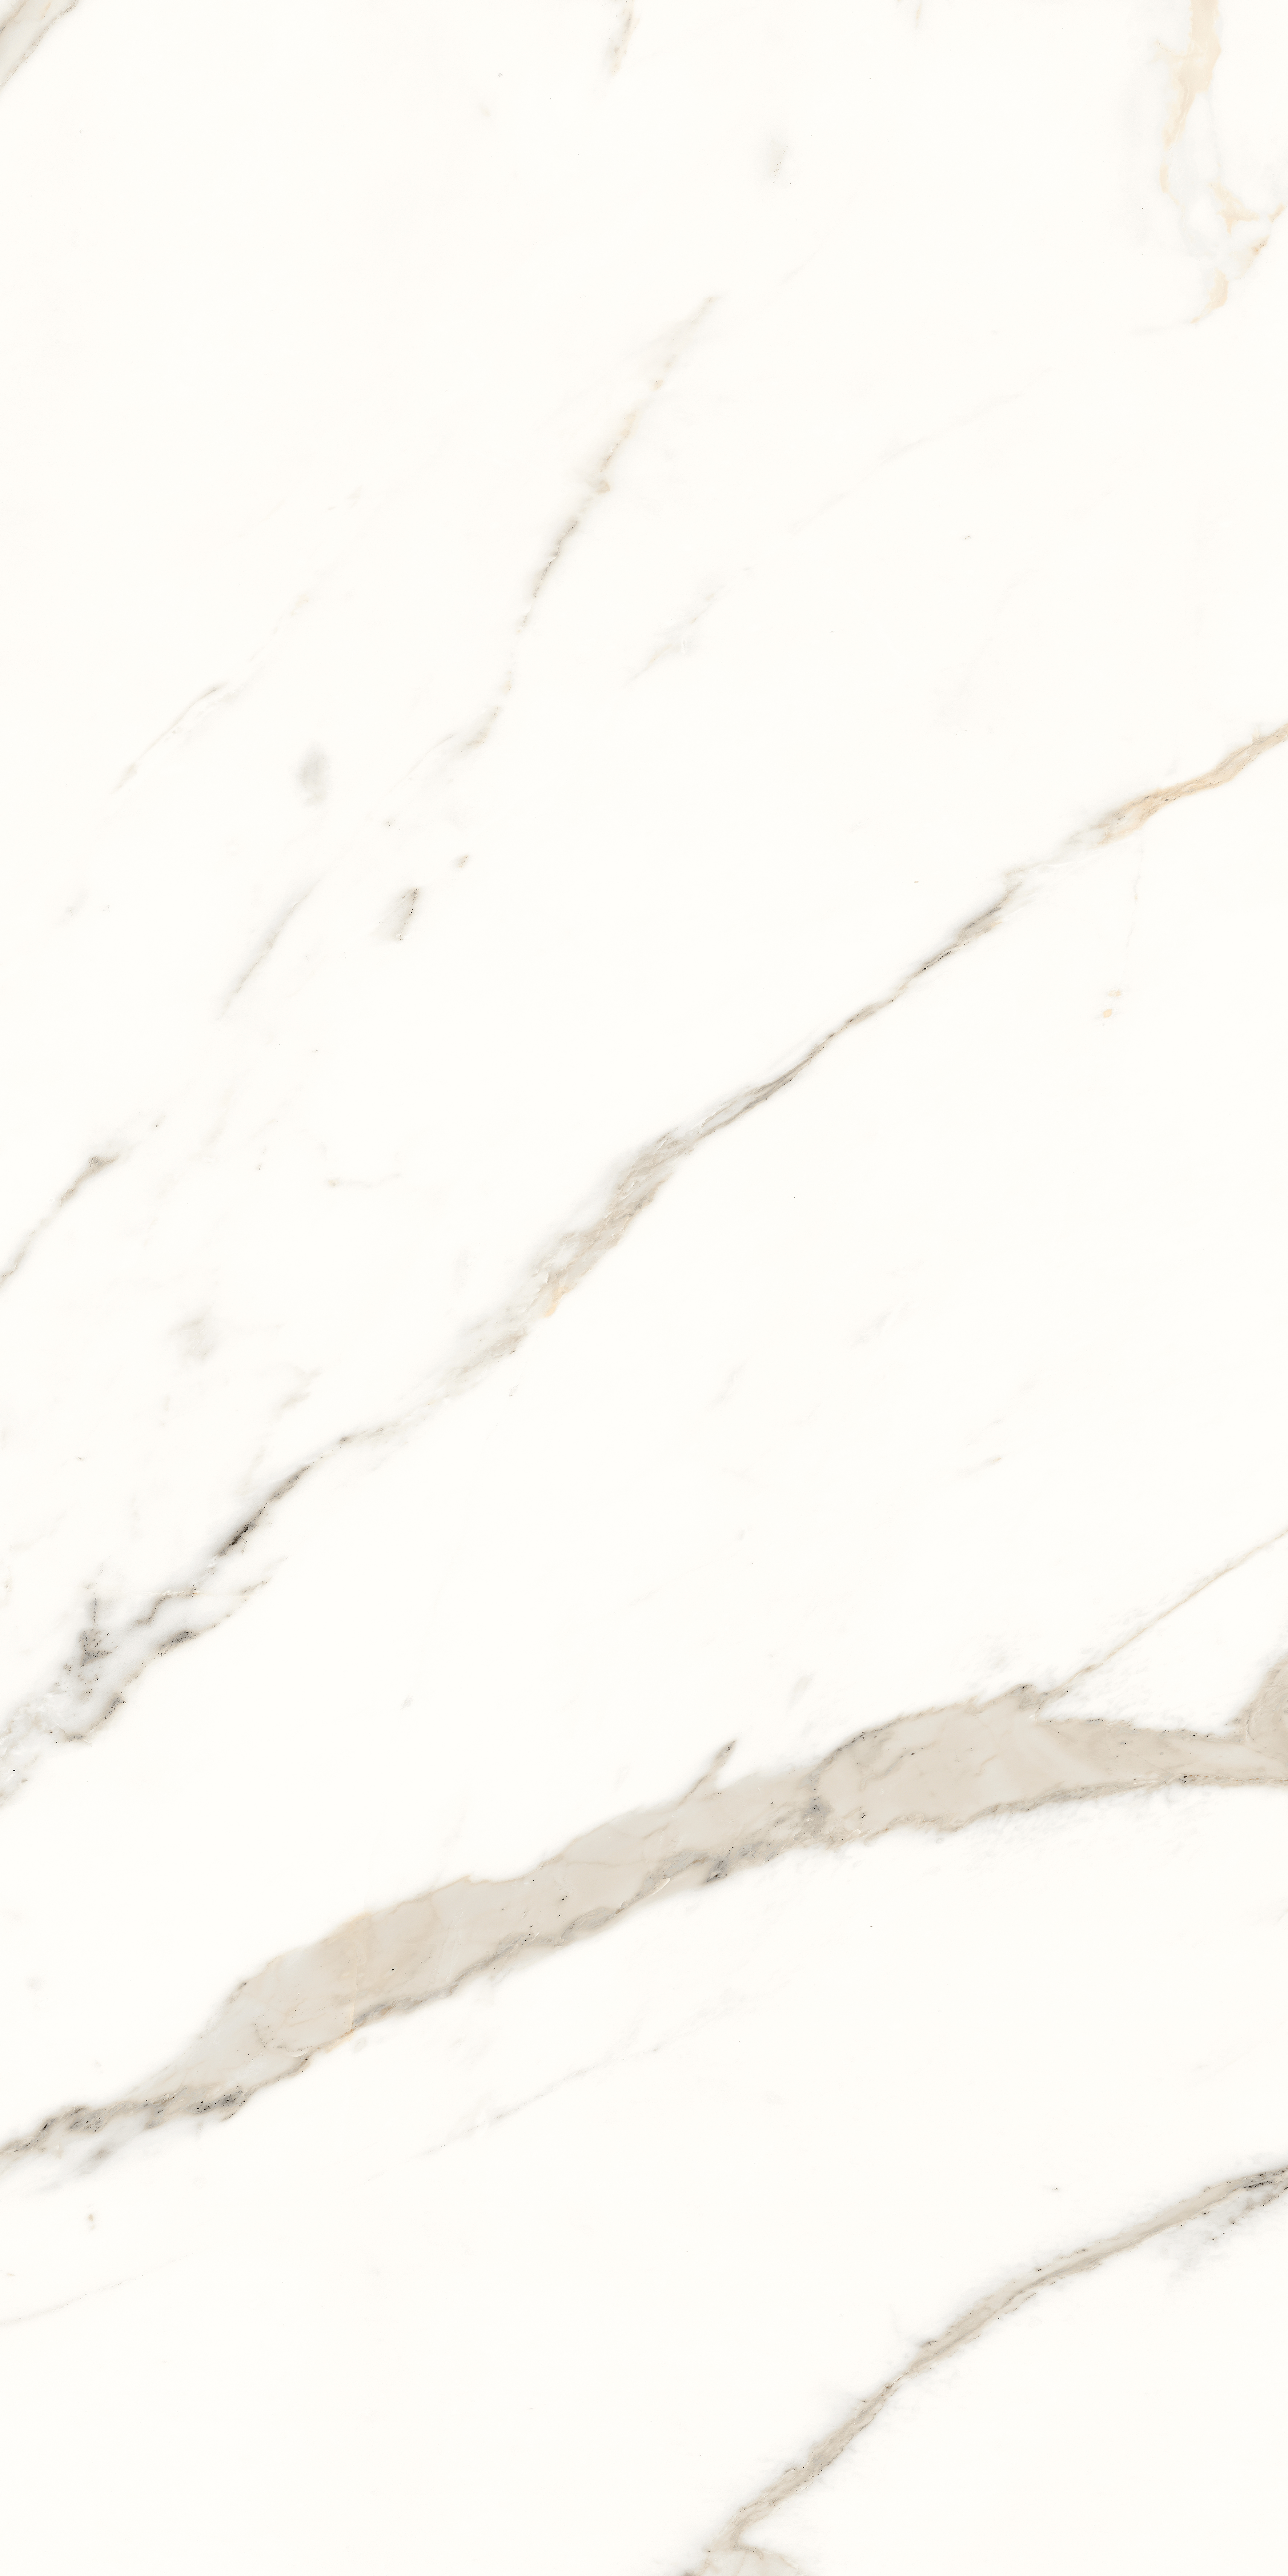 Panaria Trilogy Calacatta White Antibacterial - Lux PGXTY50 60x120cm rectified 9,5mm